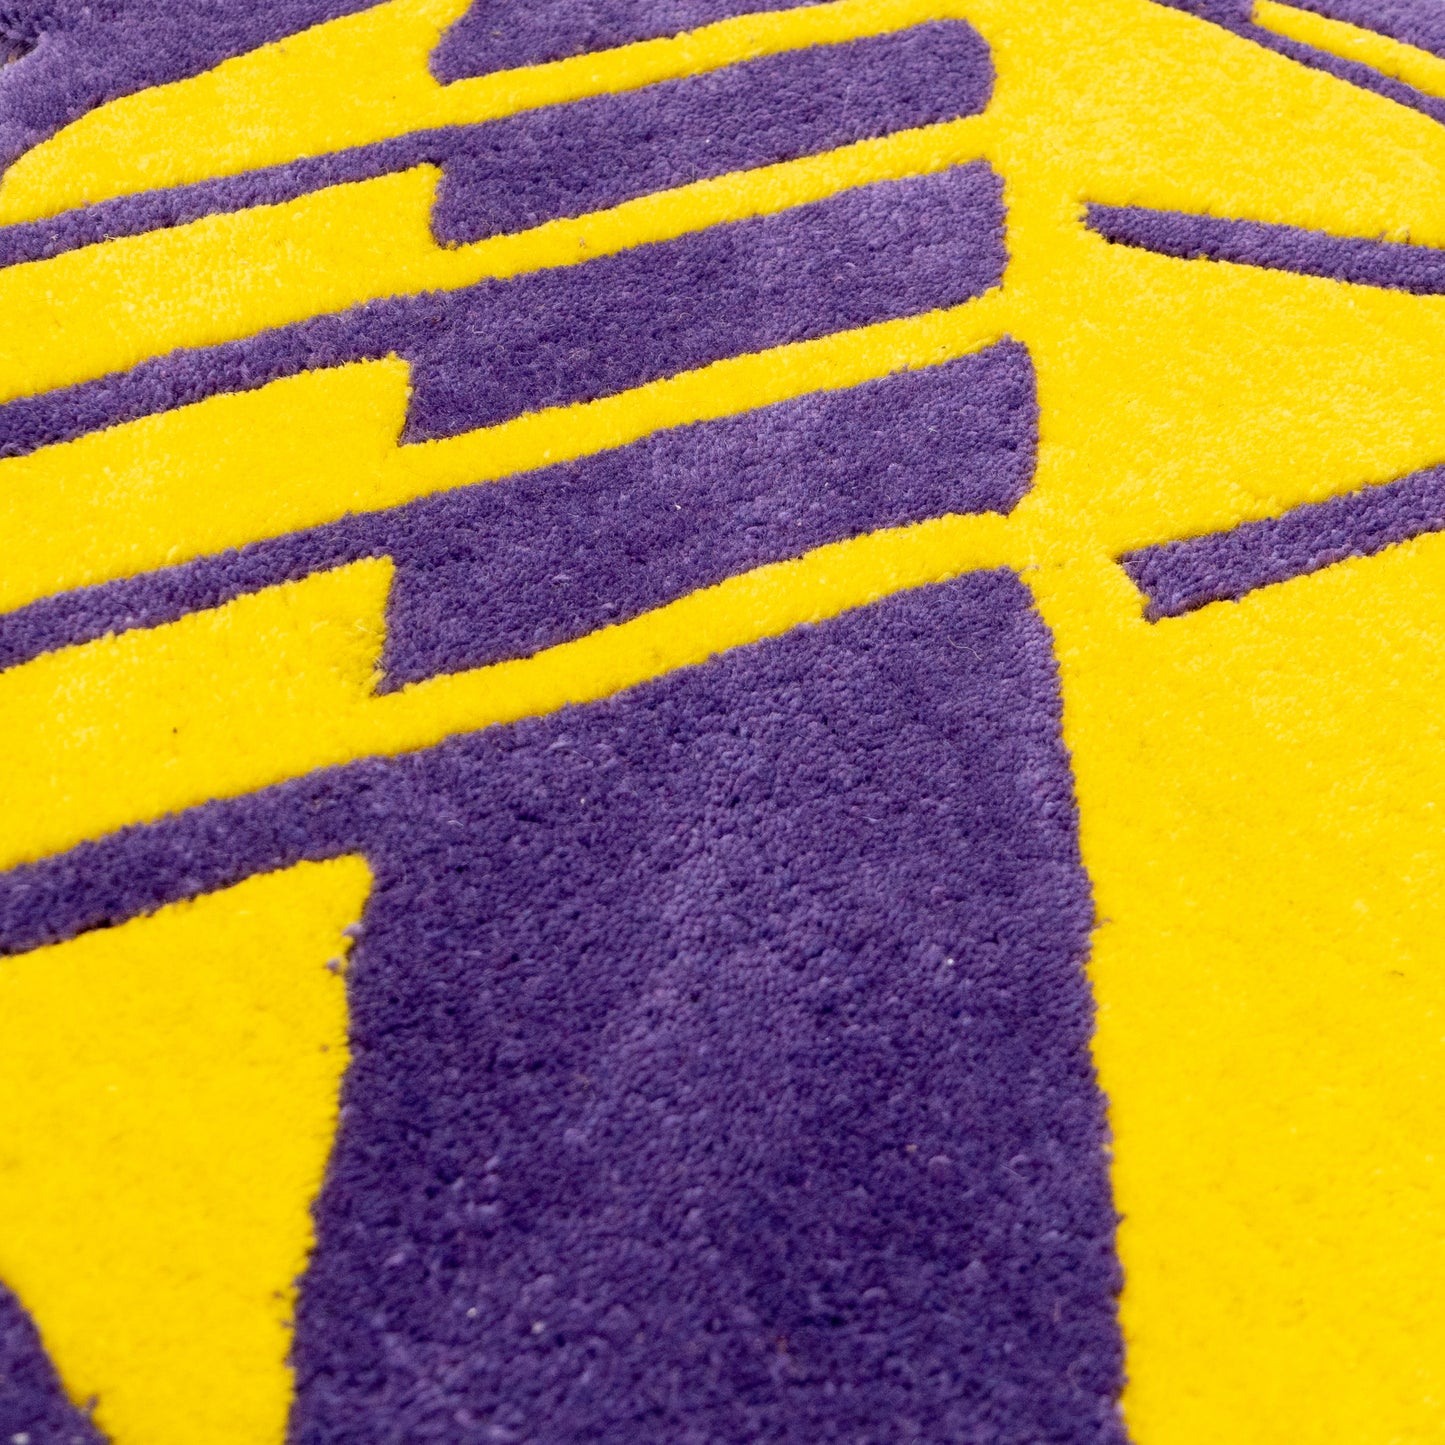 Lakers Rug by Noche